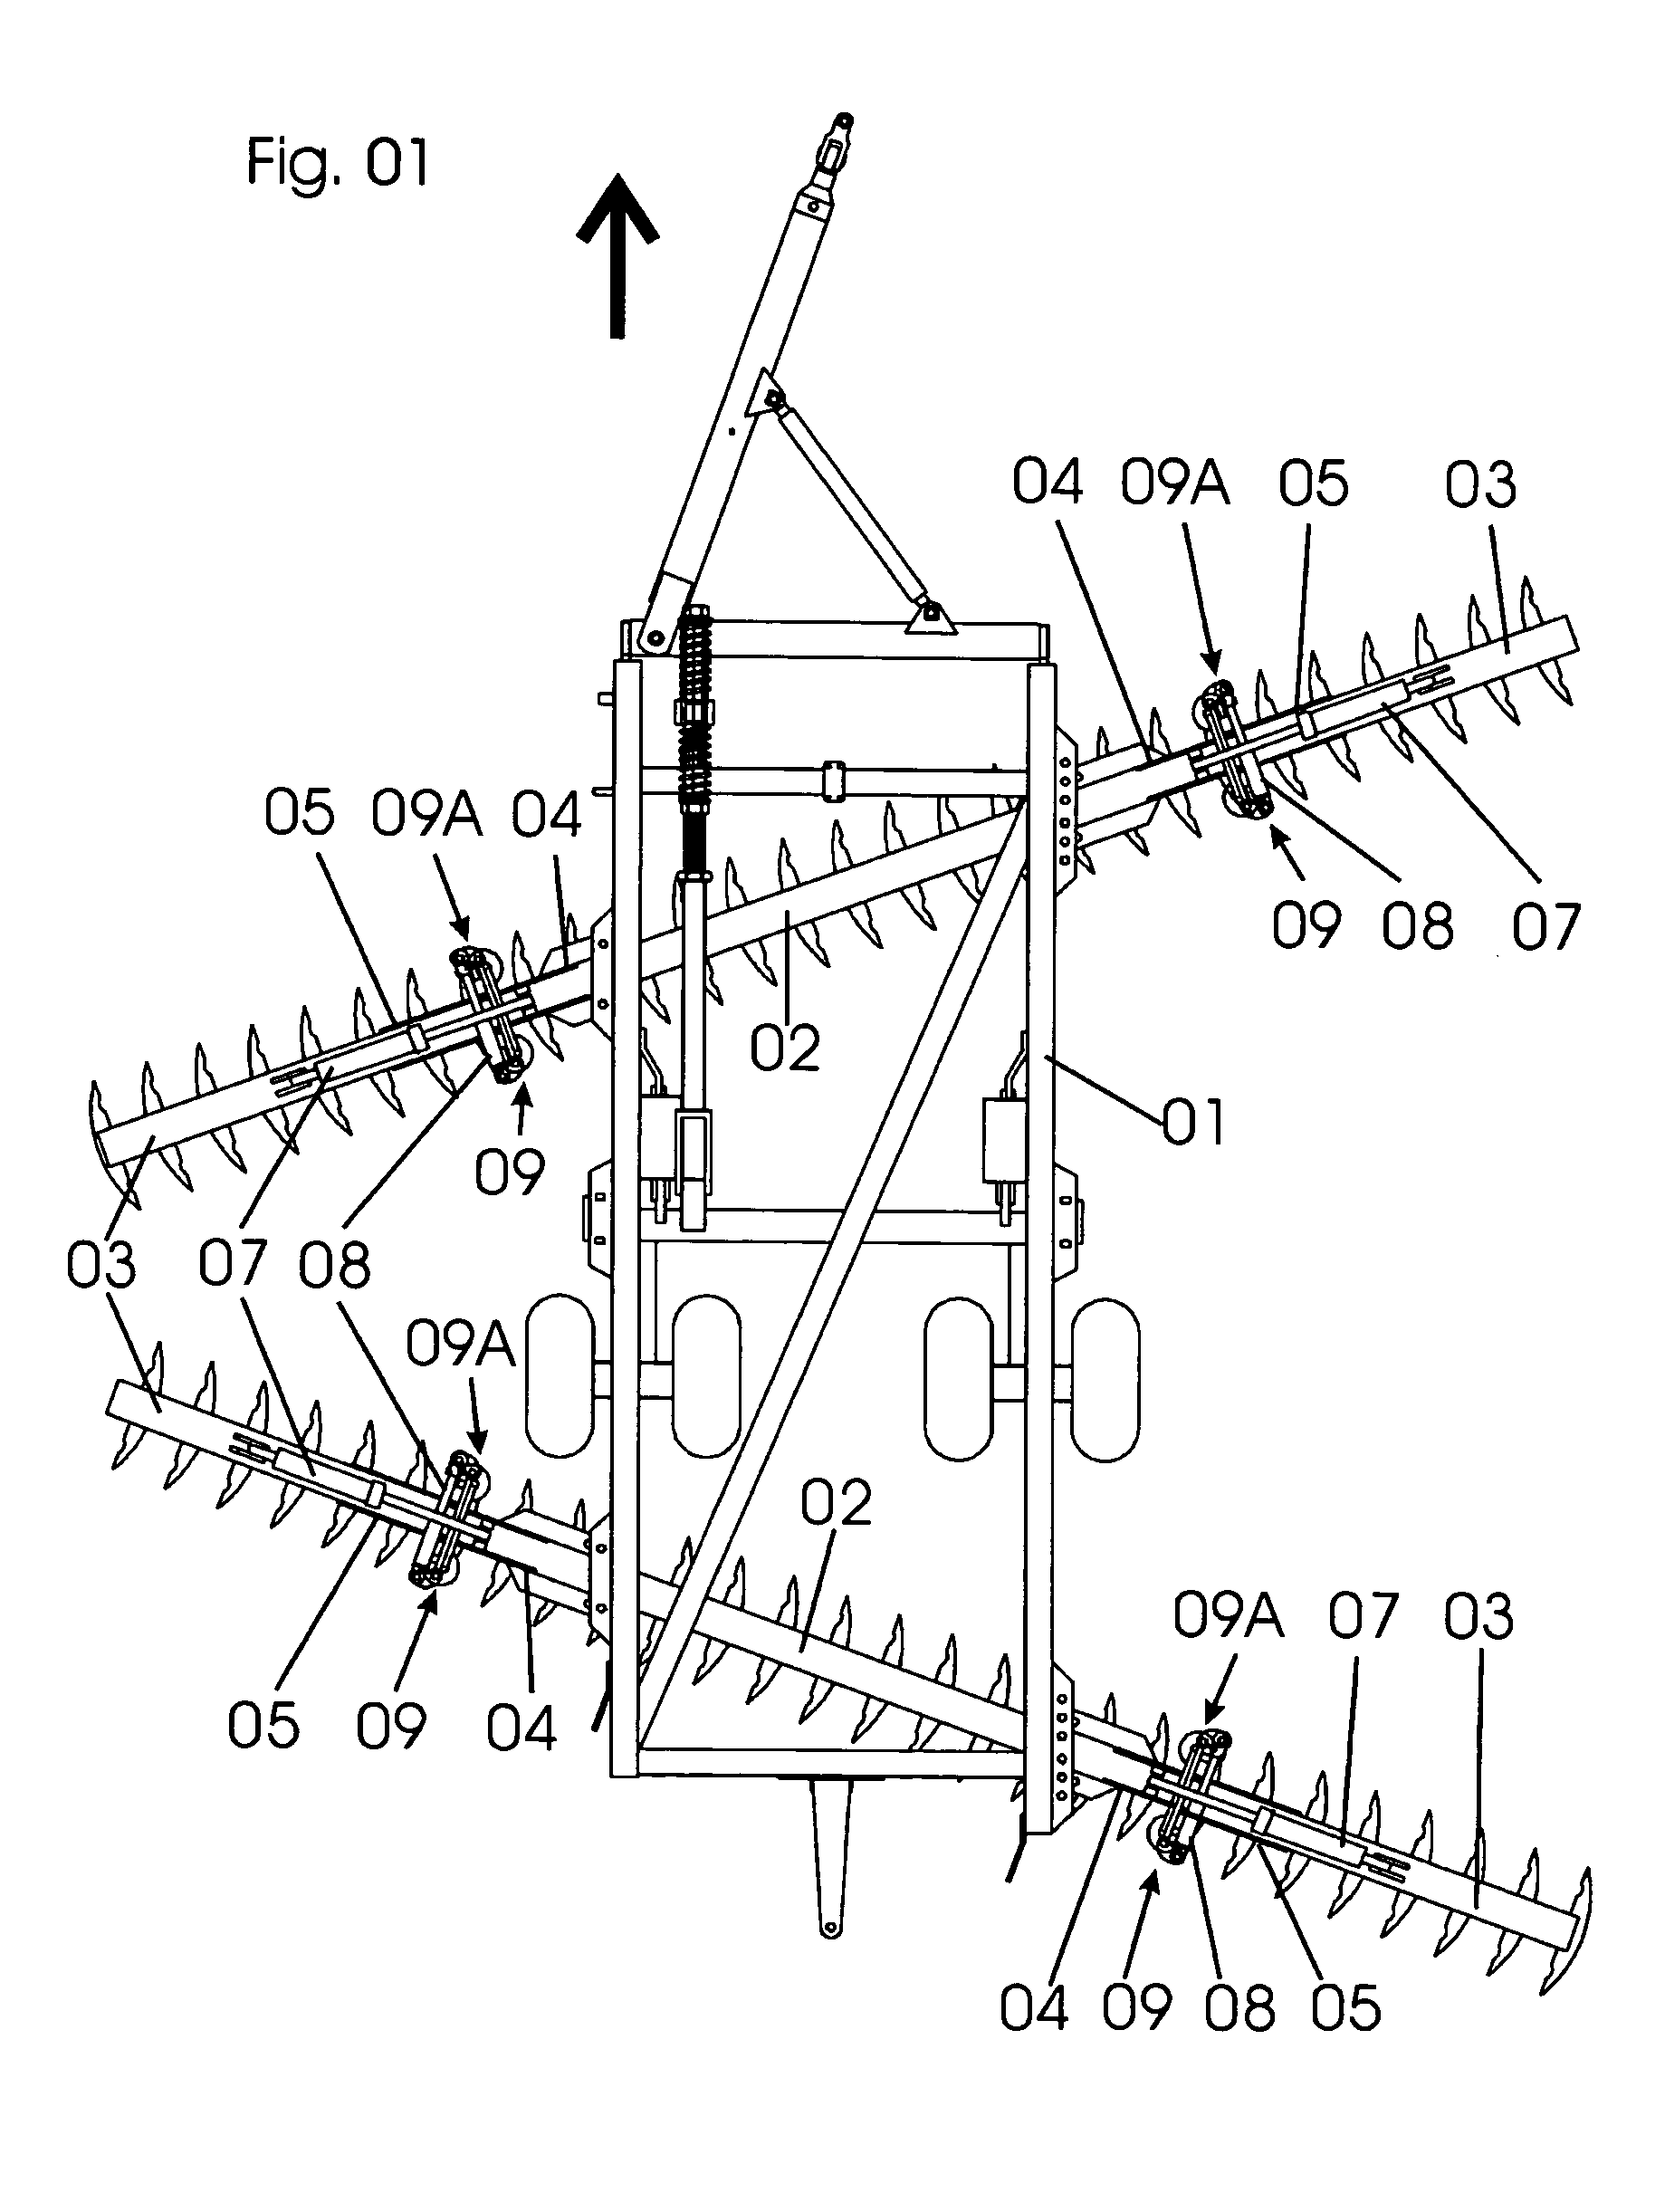 Articulating and locking mechanism for farm implement chassis